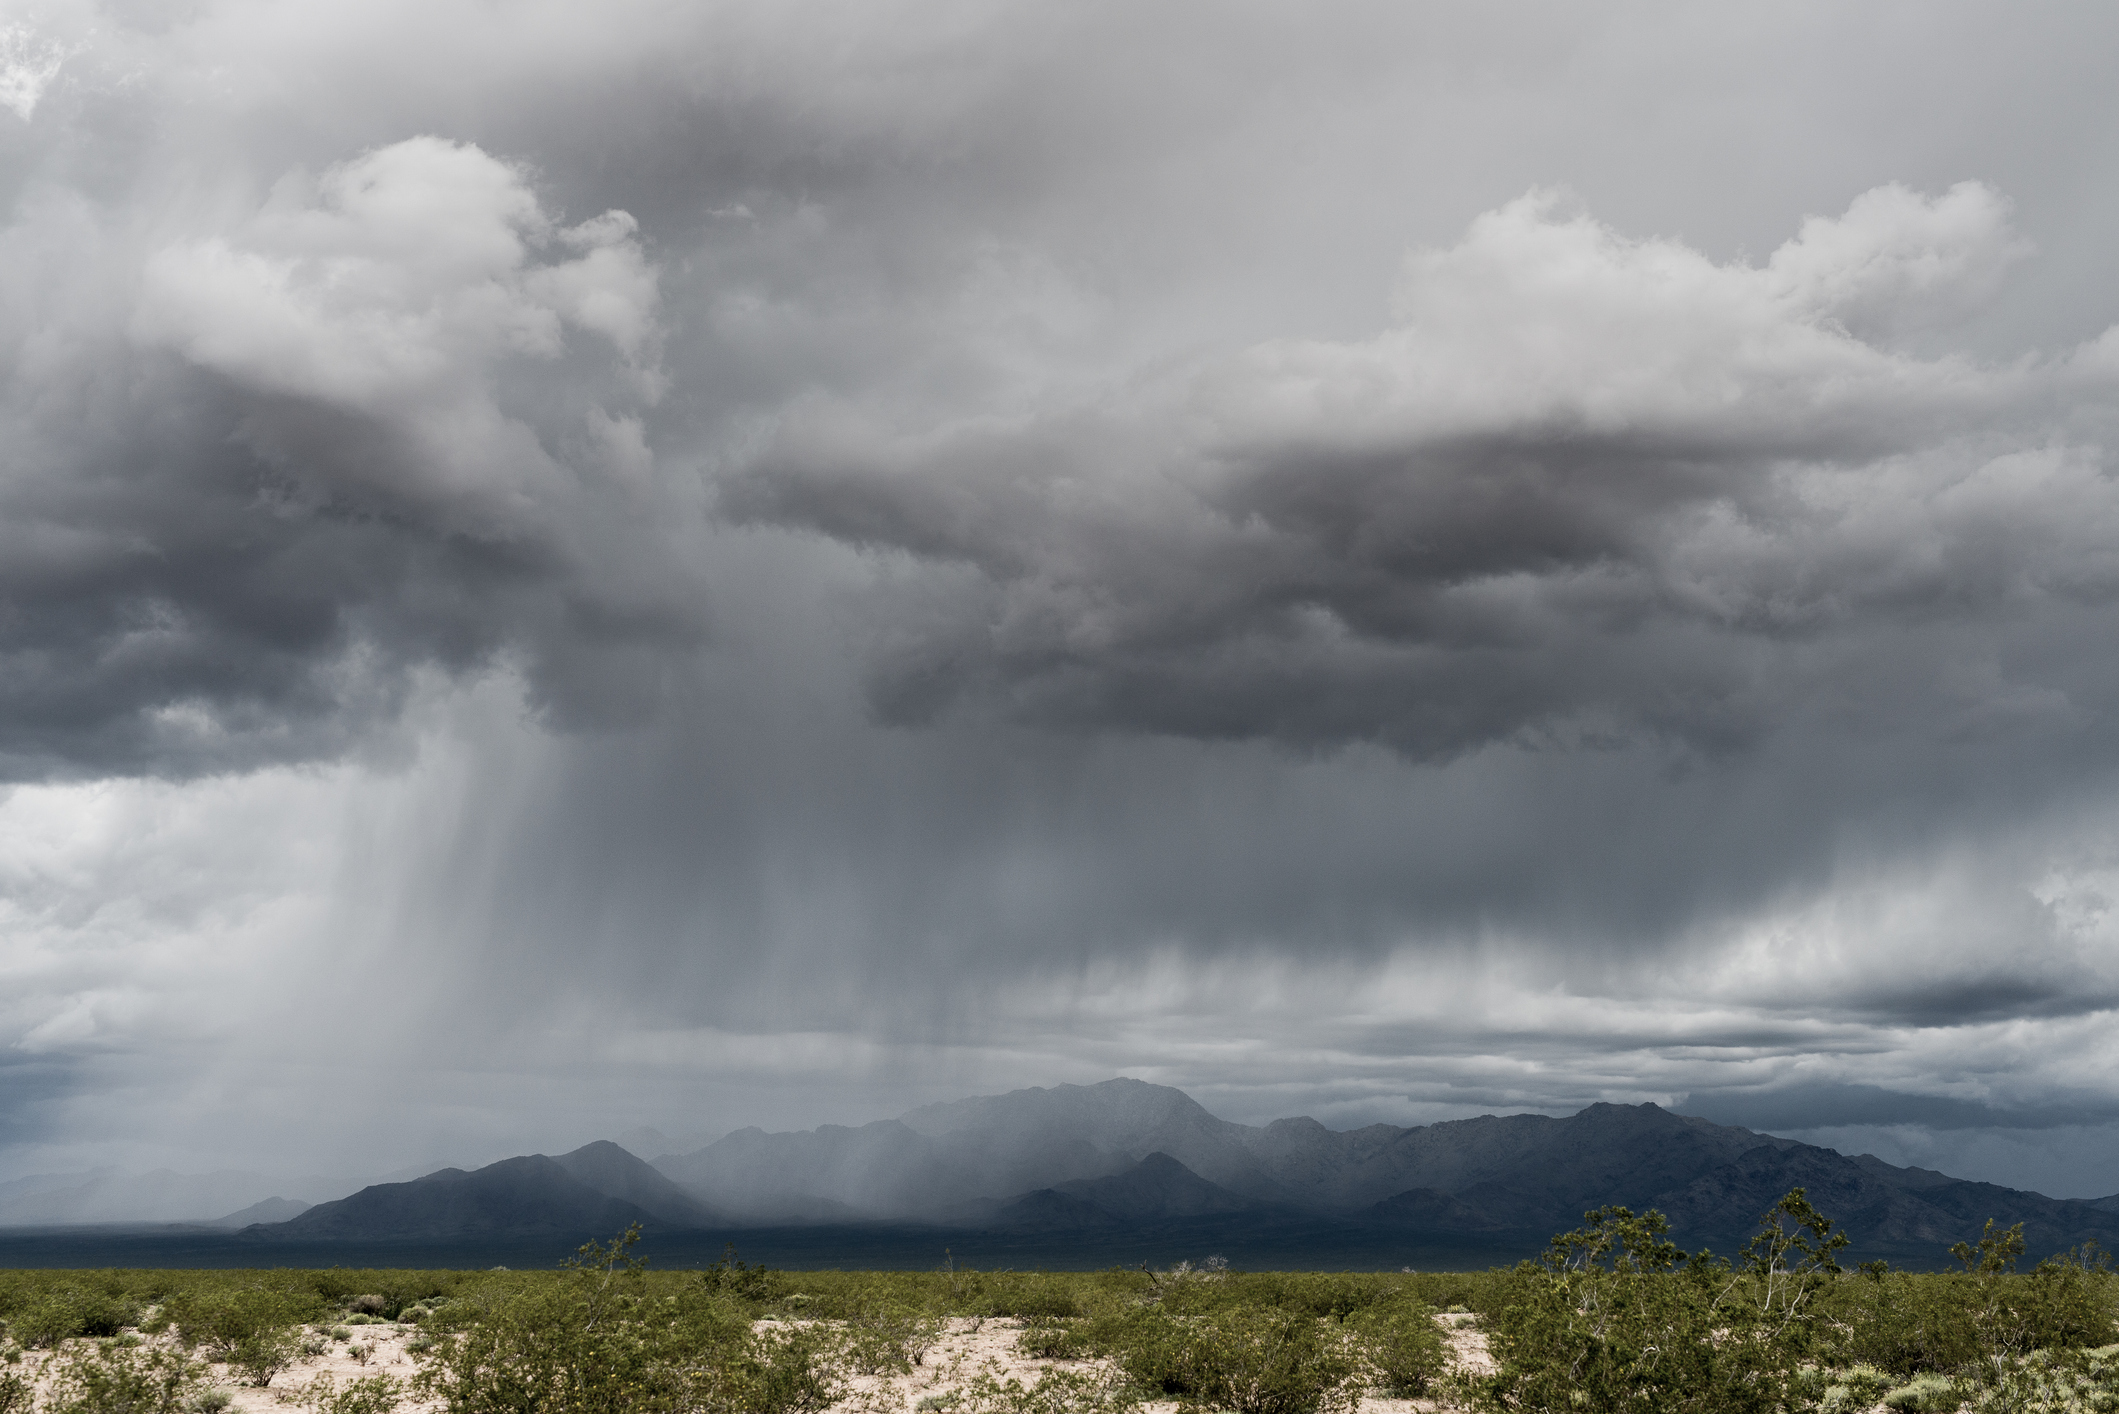 Thunderstorm in Southern California. (Getty Images)